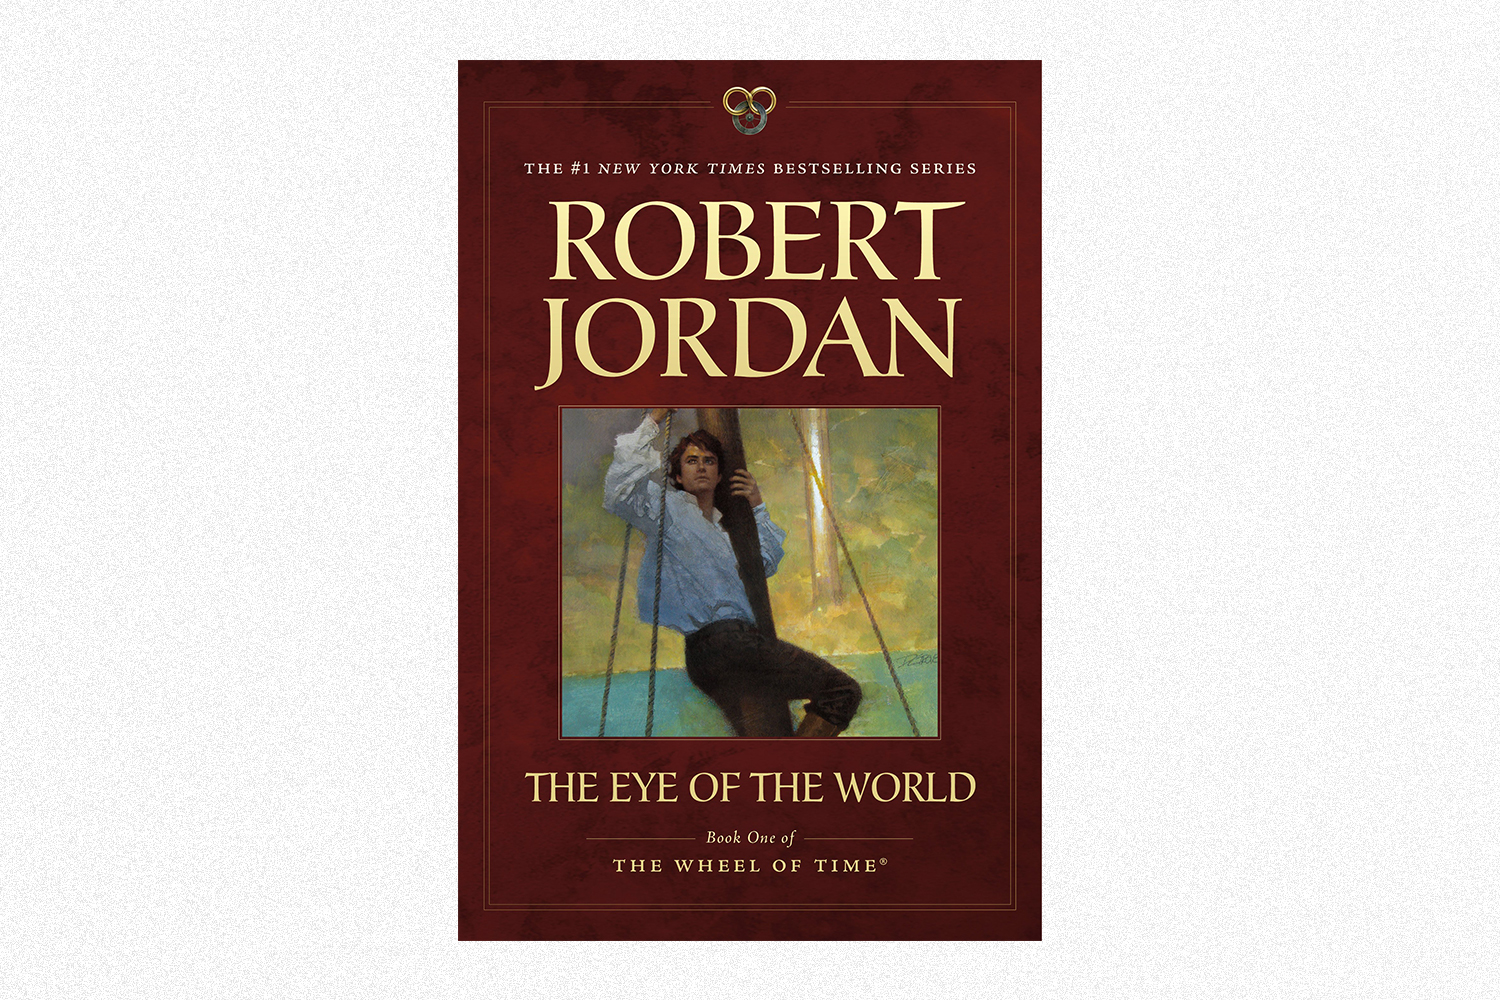 The book cover for "The Eye of the World" by Robert Jordan from The Wheel of Time series